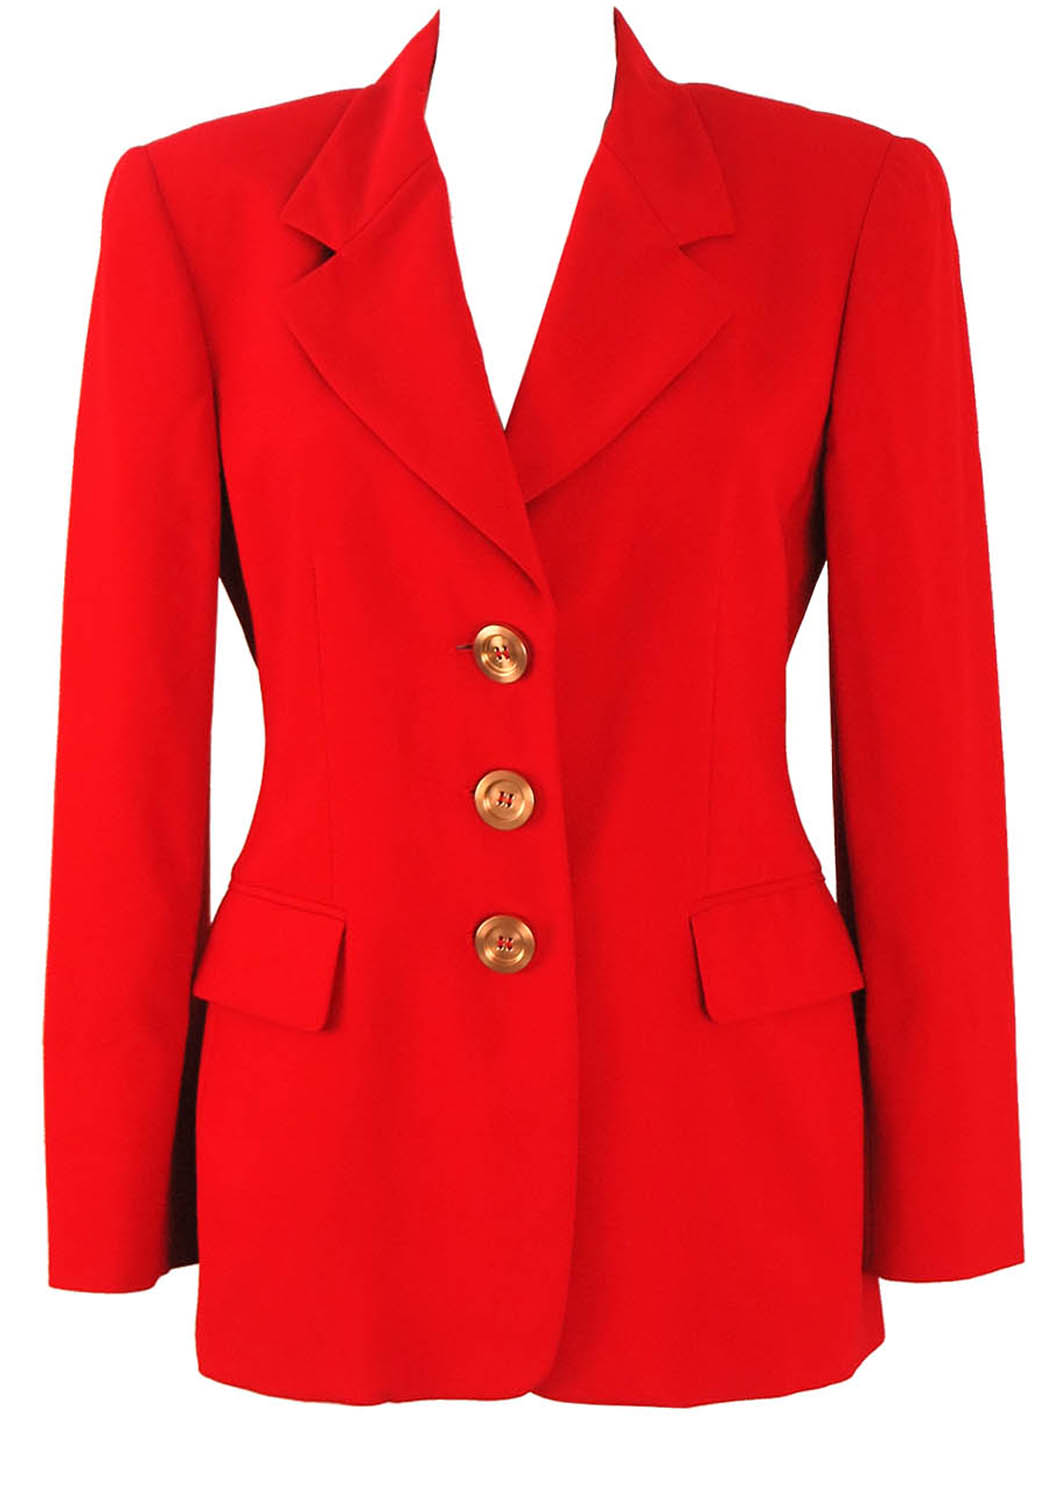 Ferre 'Studio 0001' Red Jacket with Gold Buttons - S/M | Reign Vintage